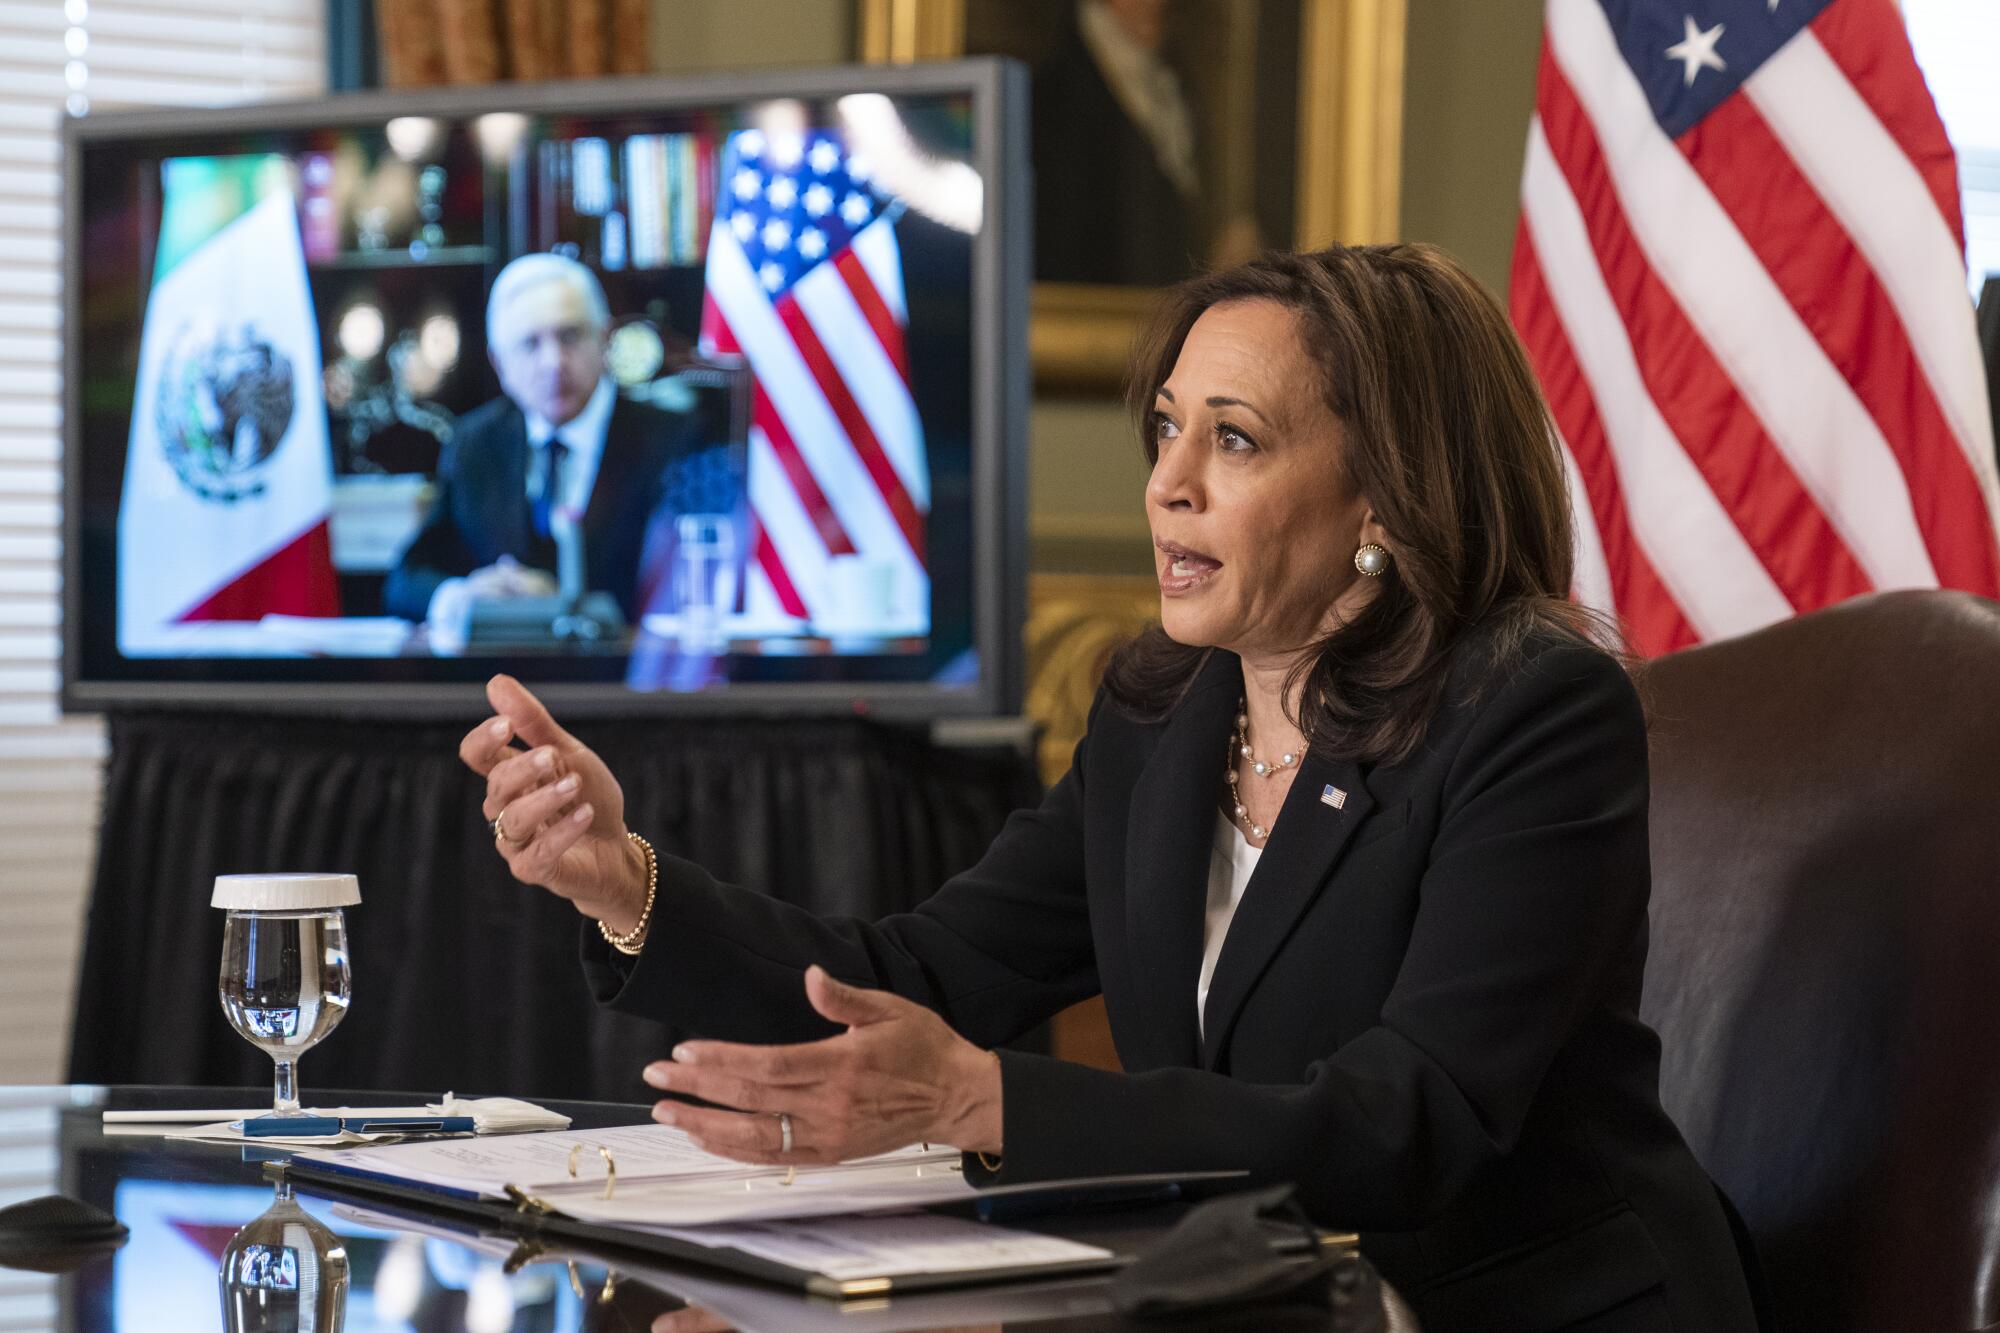 Kamala Harris gestures while speaking at a desk; behind her, Mexican President Andrés Manuel López Obrador on a monitor